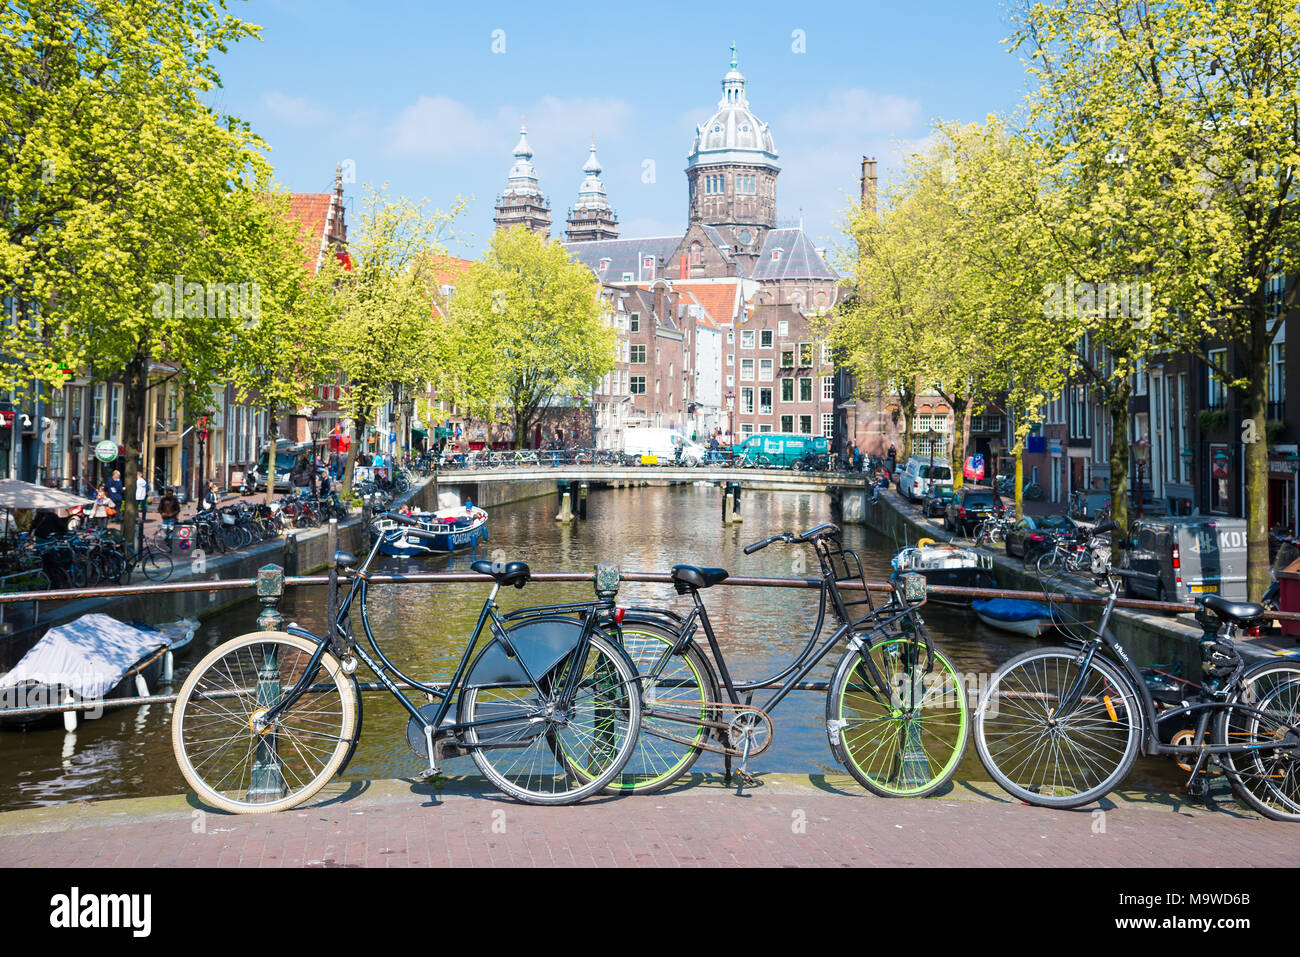 Amsterdam, Netherlands - April 20, 2017: Bicycles parked on a bridge in Amsterdam, The Netherlands Stock Photo